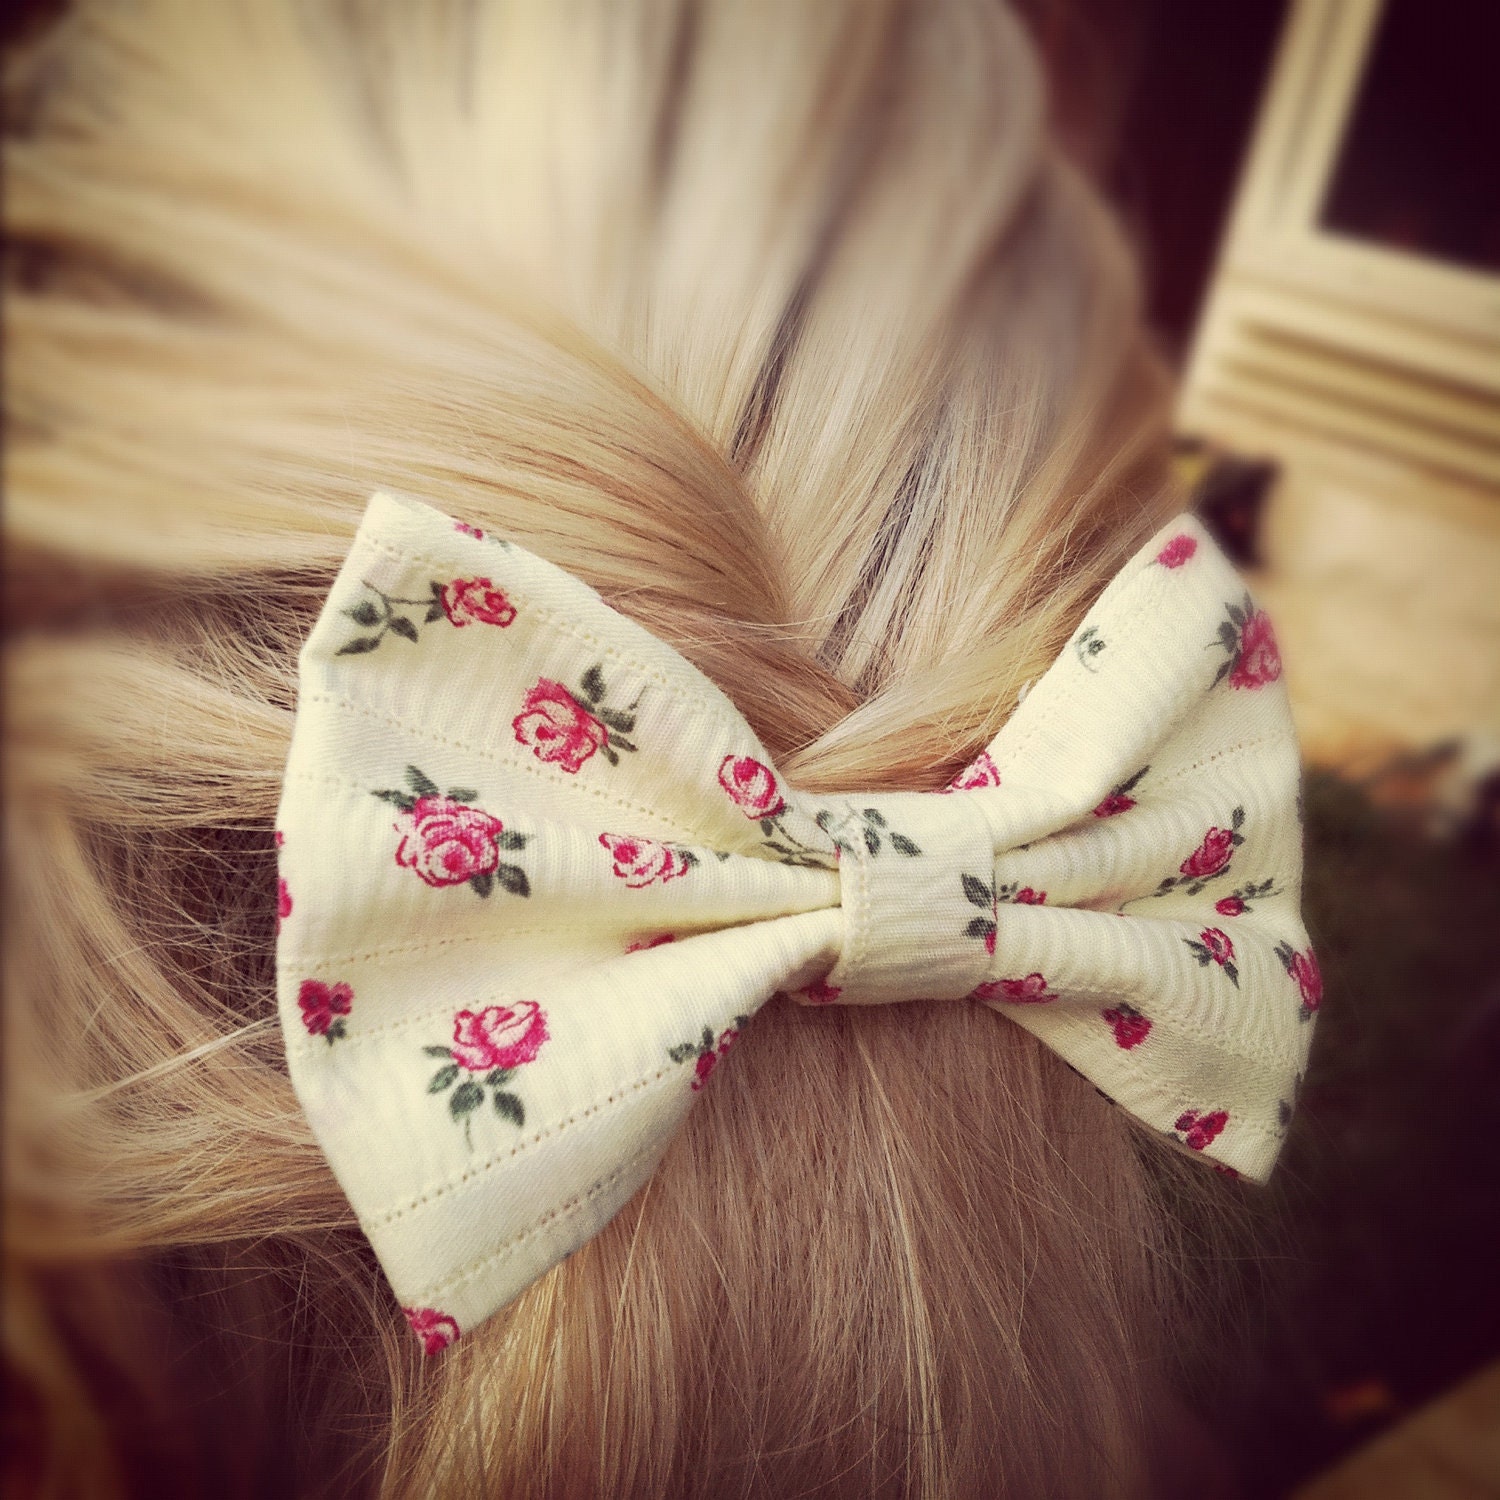 THE LAST ONE  floral hair bow - Banana yellow